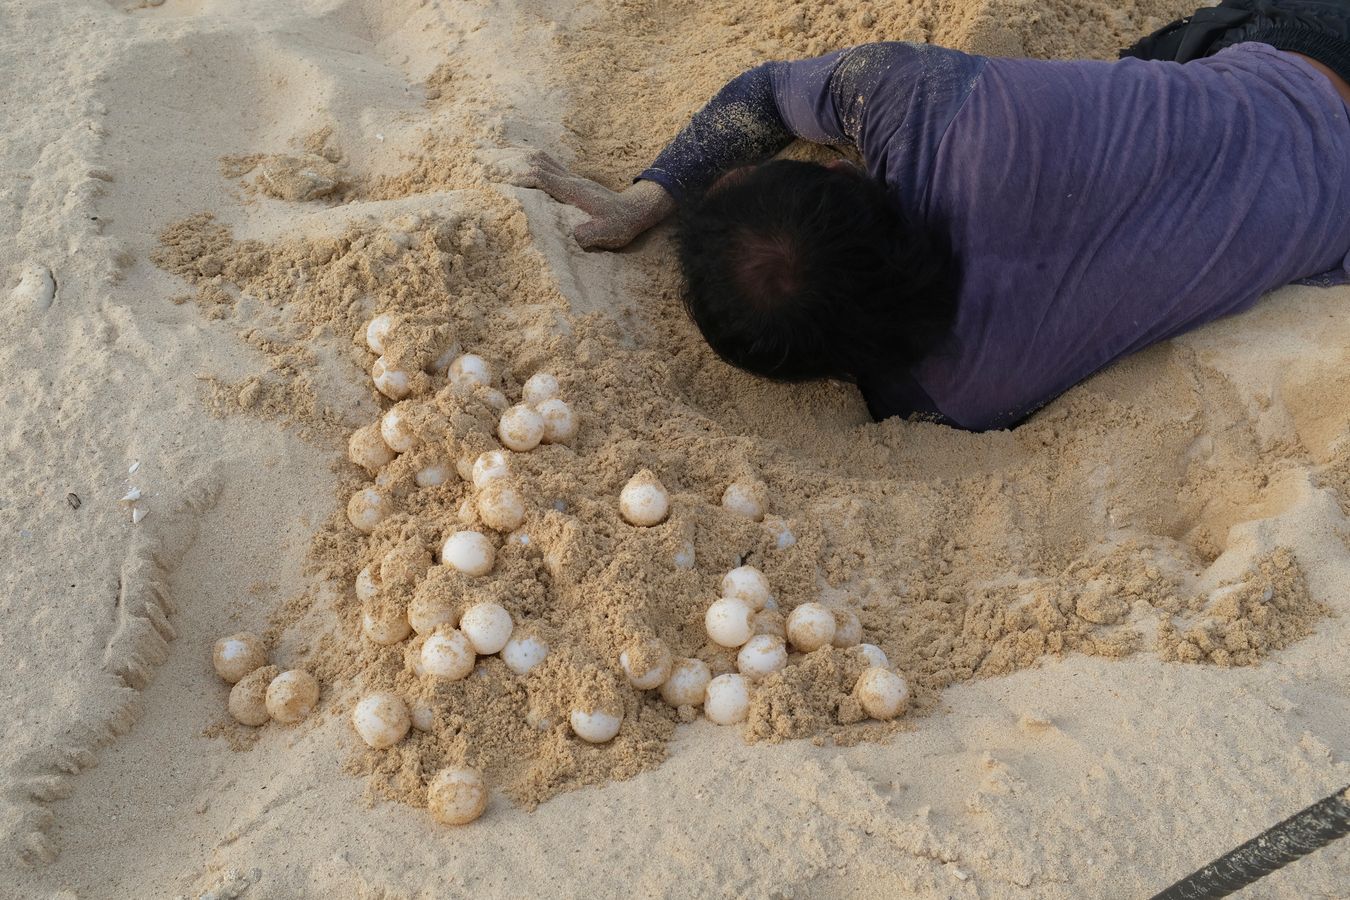 Early in the morning, the ranger removes the sea turtle eggs from their nest, spawned the night before, to deposit them in their new nest at the hatchery.